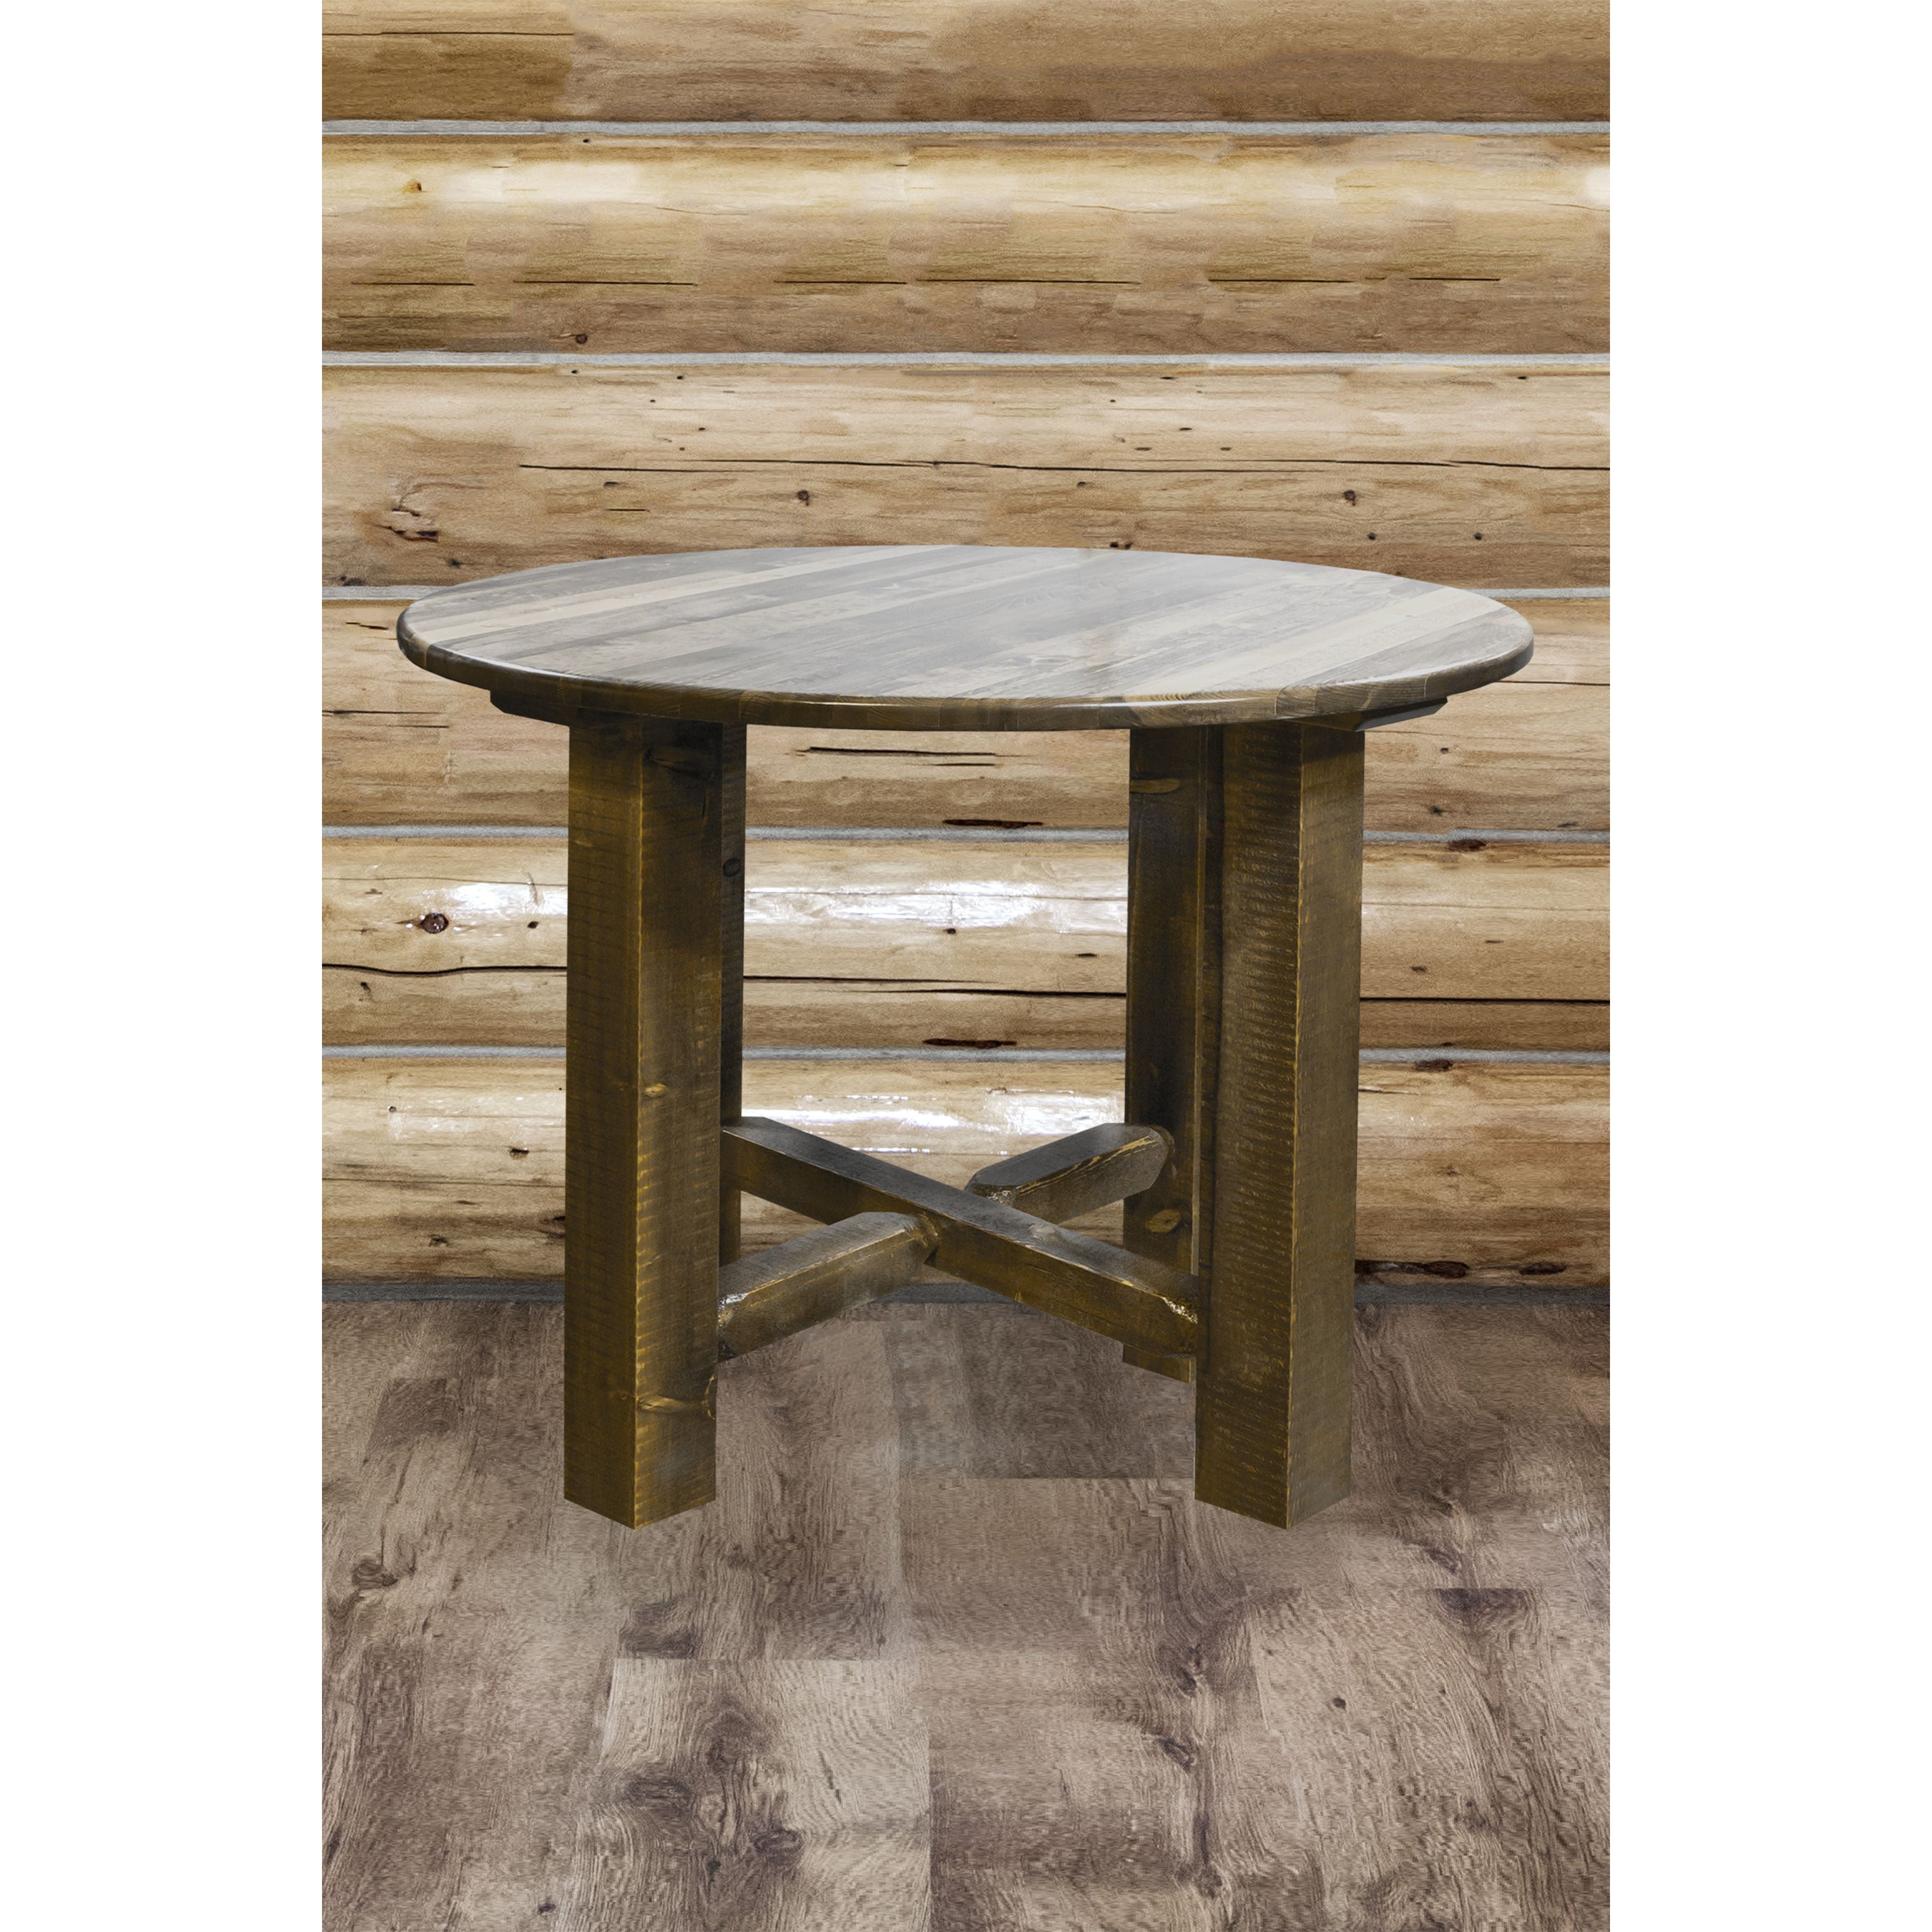 Montana Homestead Collection-Bistro-Table Stain LacquerFinish MWHCBTSL36 view